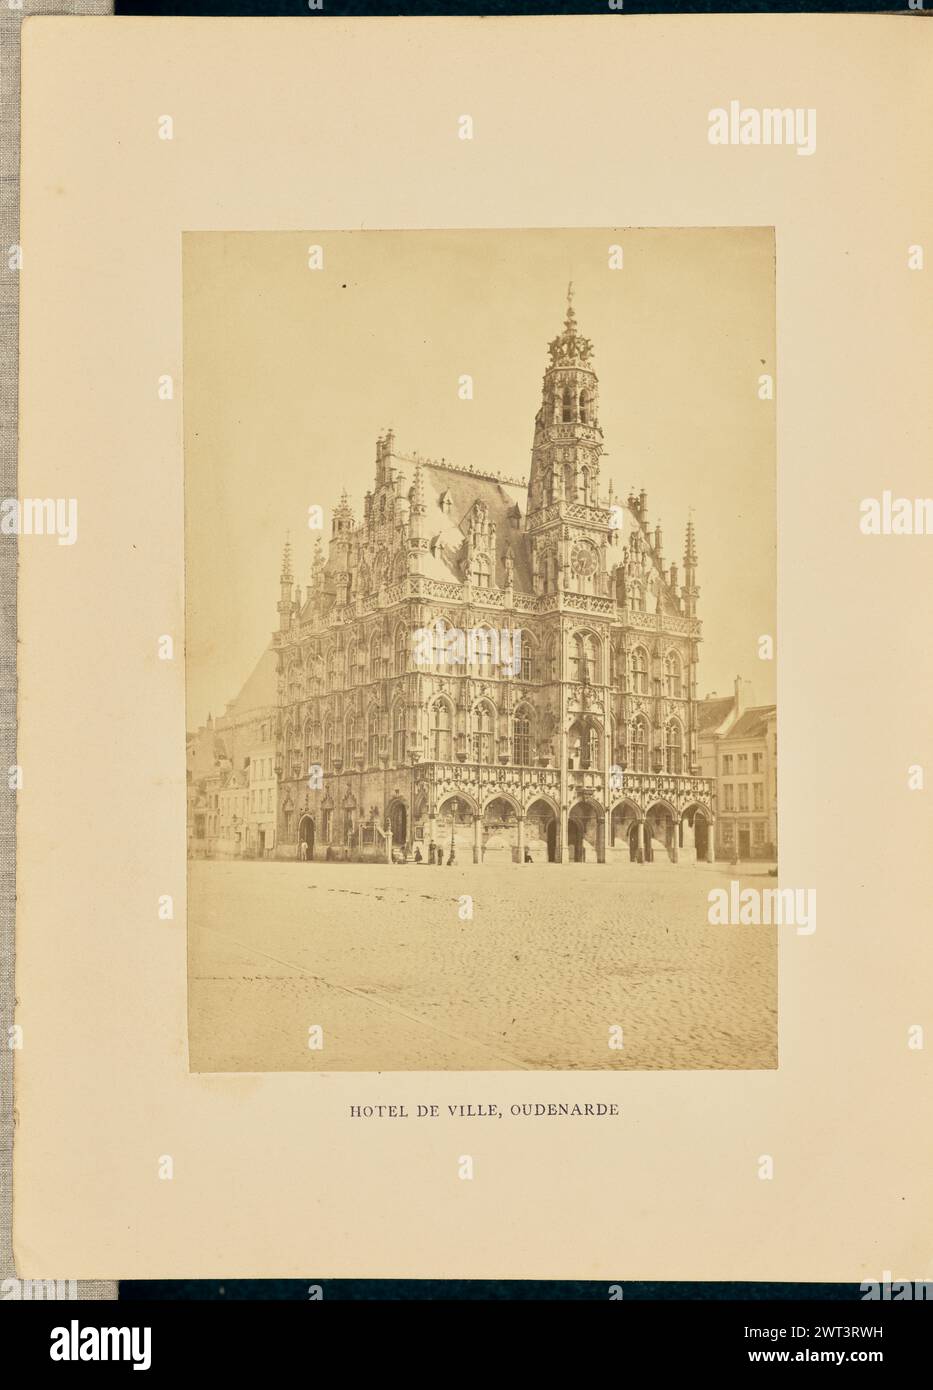 Hotel de ville, Oudenarde. Cundall & Fleming, photographer 1866 View of Oudenaarde Town Hall with a belfry in the center. (Recto, mount) lower center, imprinted in black ink: 'HOTEL DE VILLE, OUDENARDE.'; (Verso, mount) lower left, pencil: 'IB 86.15 (Cun)'; Stock Photo